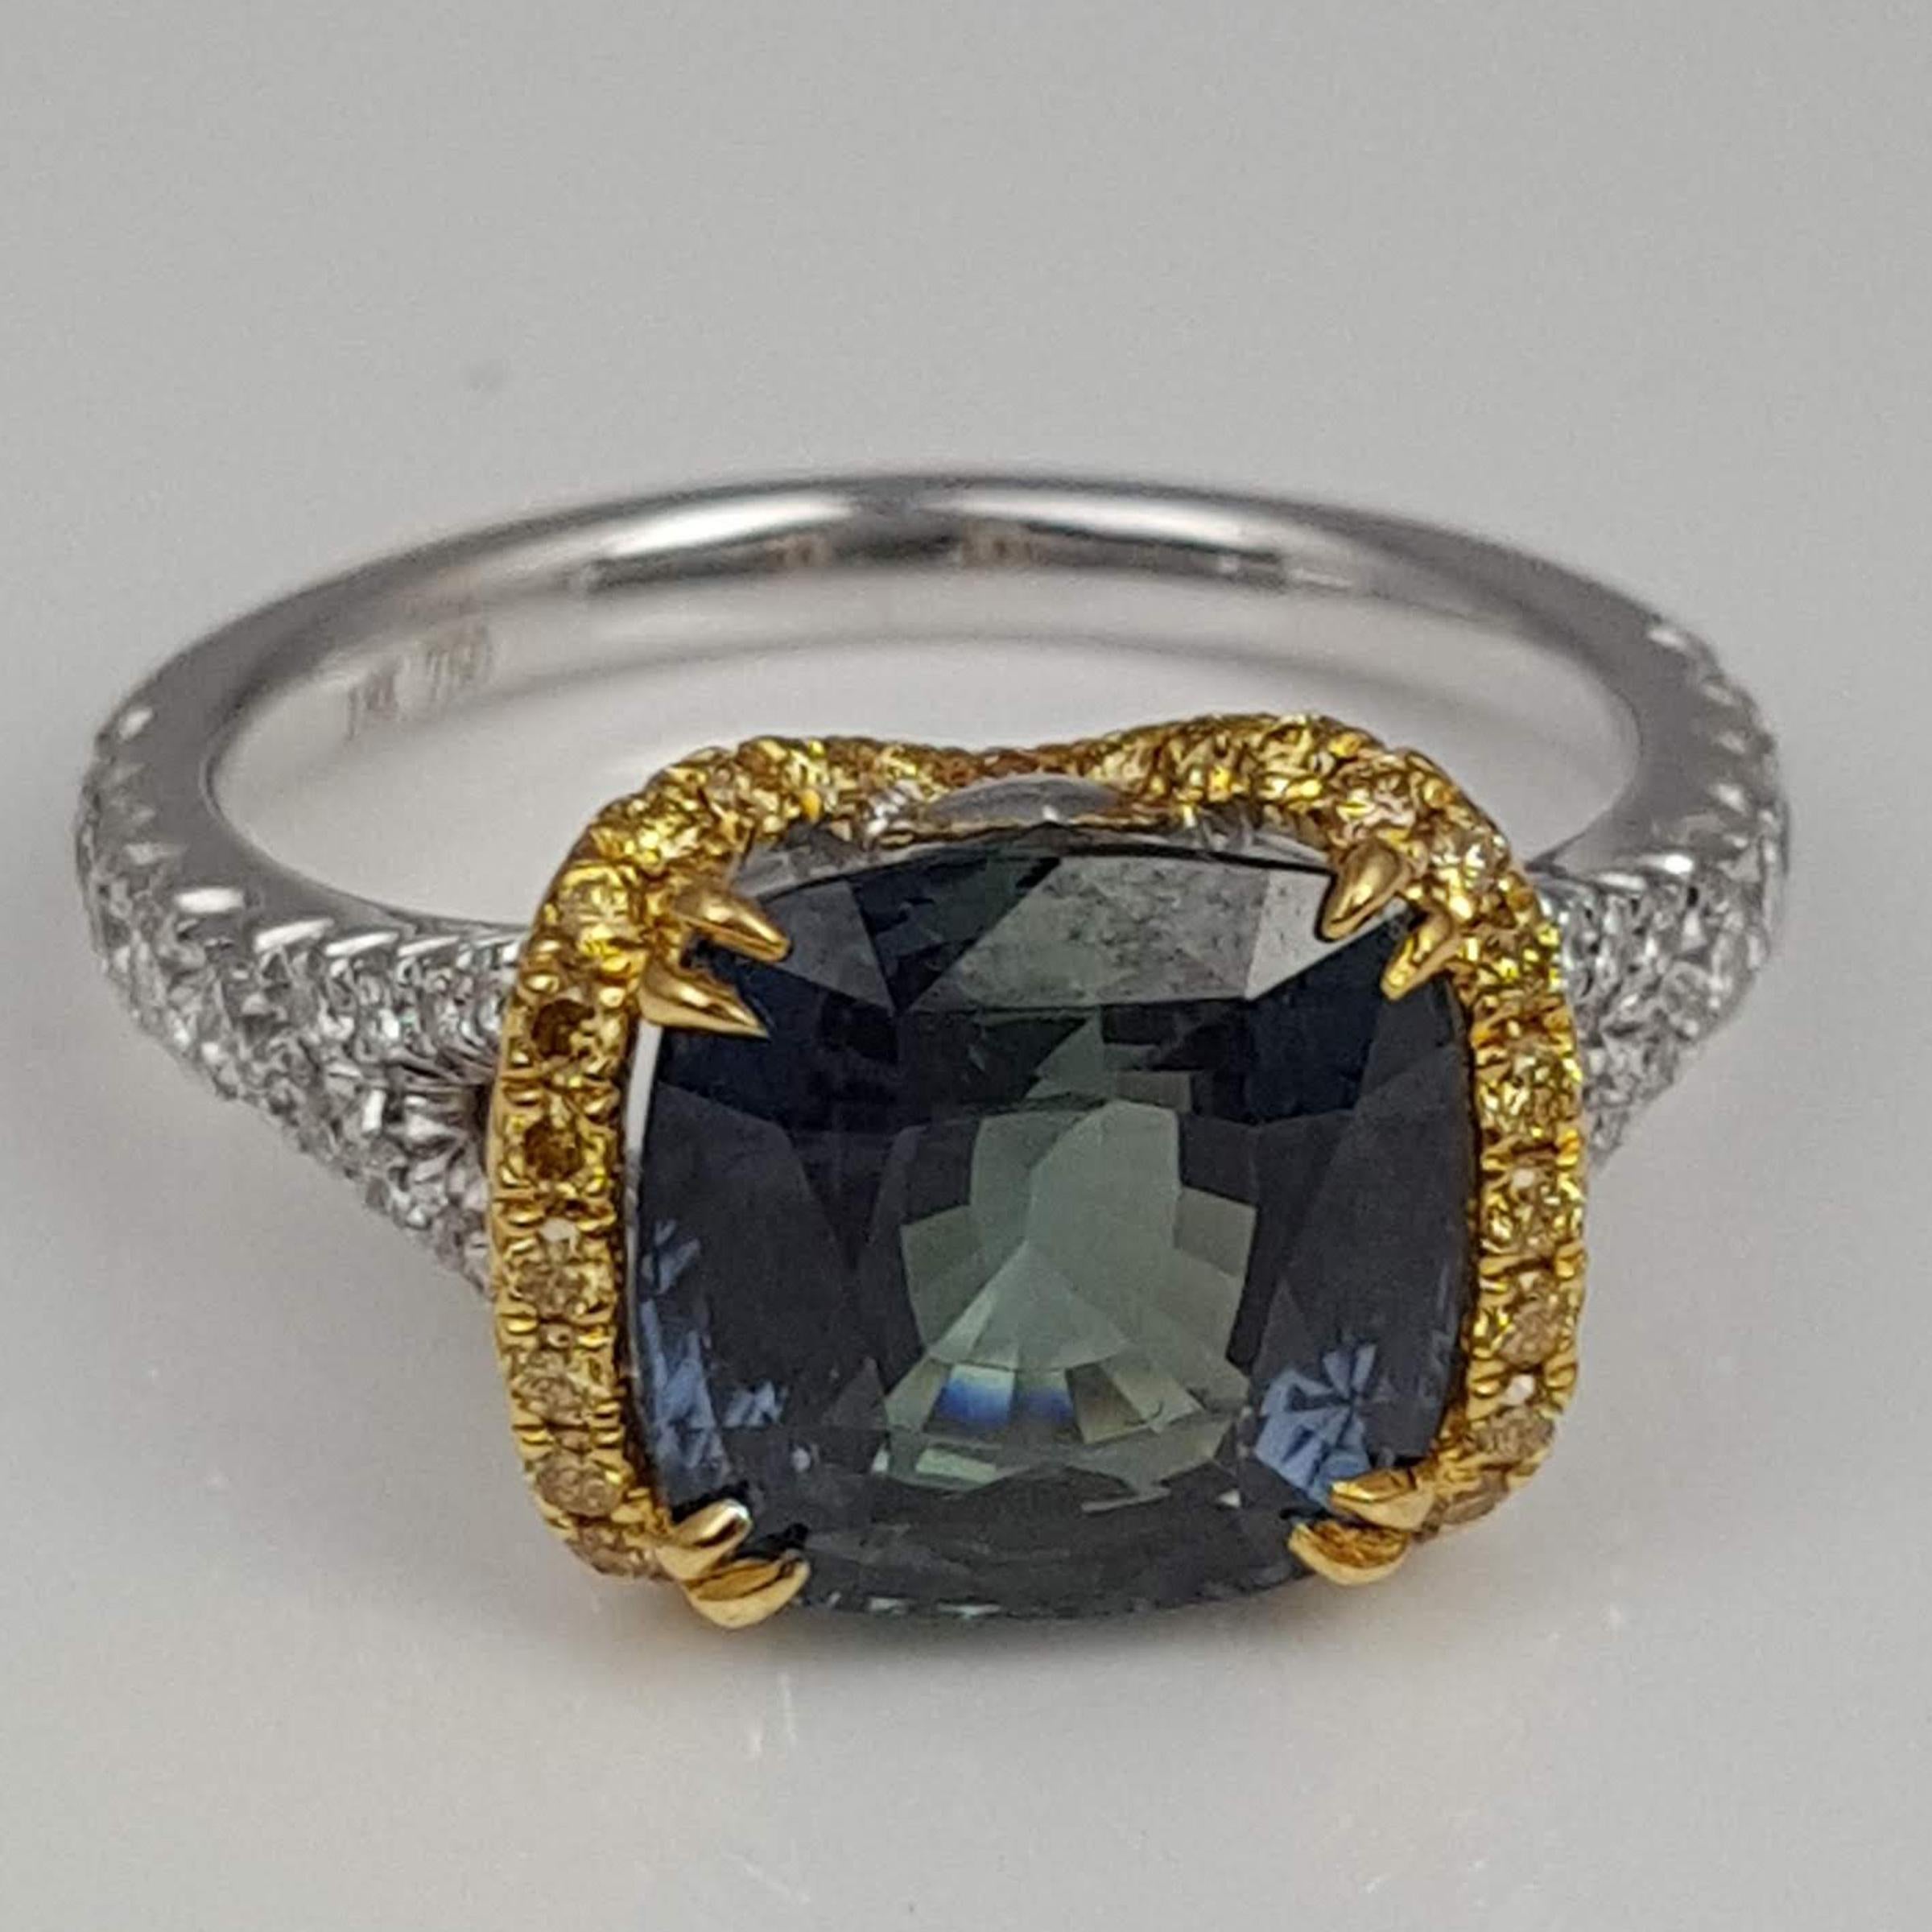 With a GIA Certified 4.50 carat cushion cut Green Sapphire center, among 0.24 carats round yellow diamonds and 0.36 carats white diamonds (total diamond weight 0.60 carats), this ring shines from every angle.

GIA Certification details (see